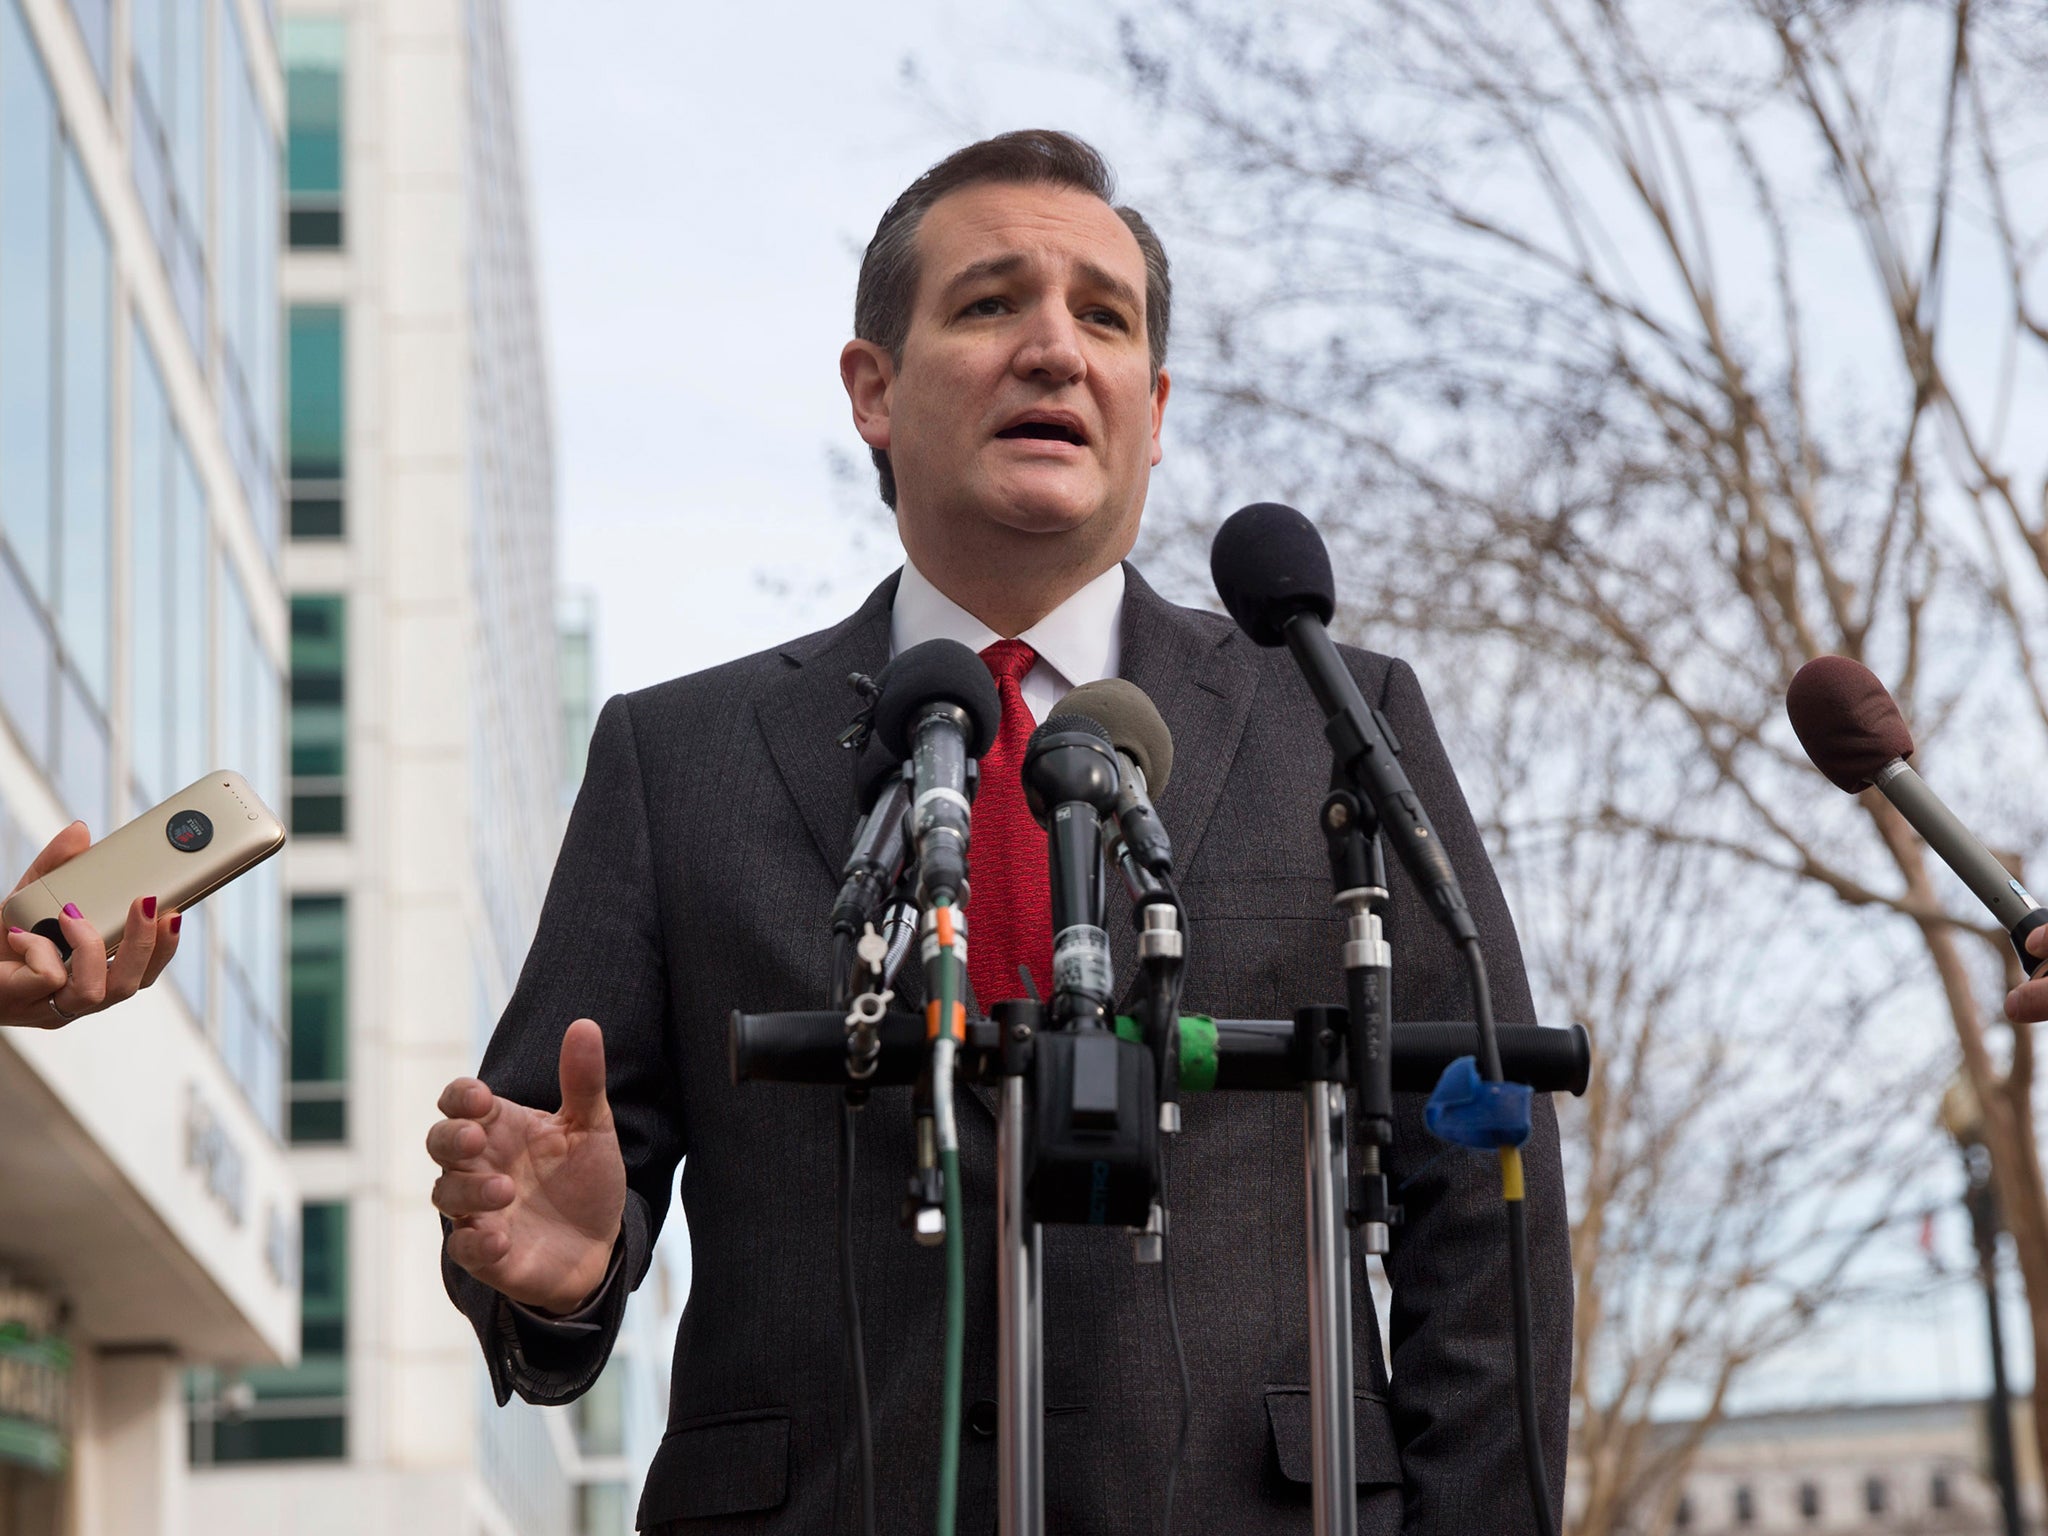 Cruz said the U.S. should stop the flow of refugees from countries where Isis has a significant presence